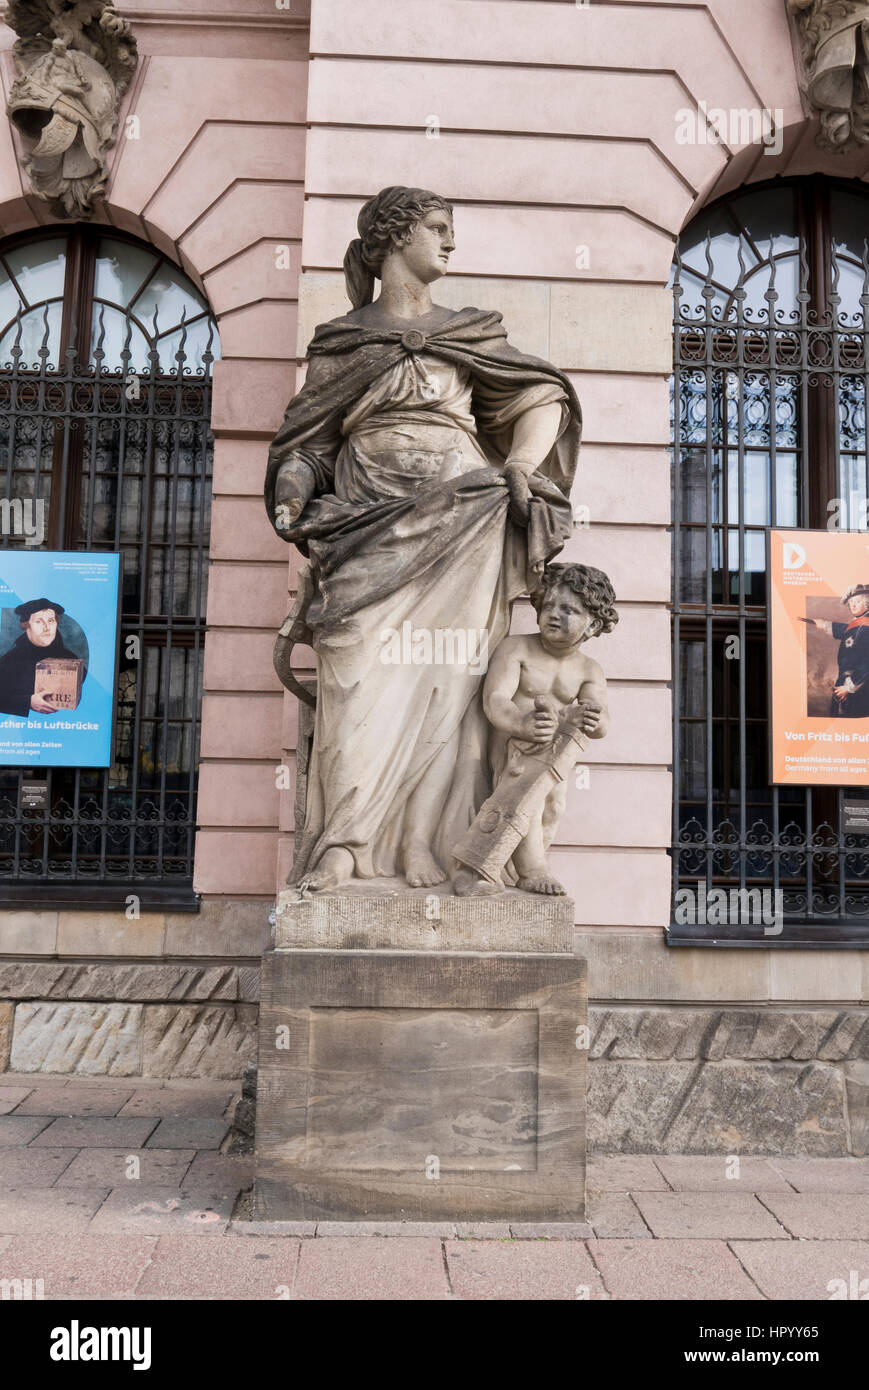 Statues outside the Zeughaus Museum, Berlin, Germany Stock Photo